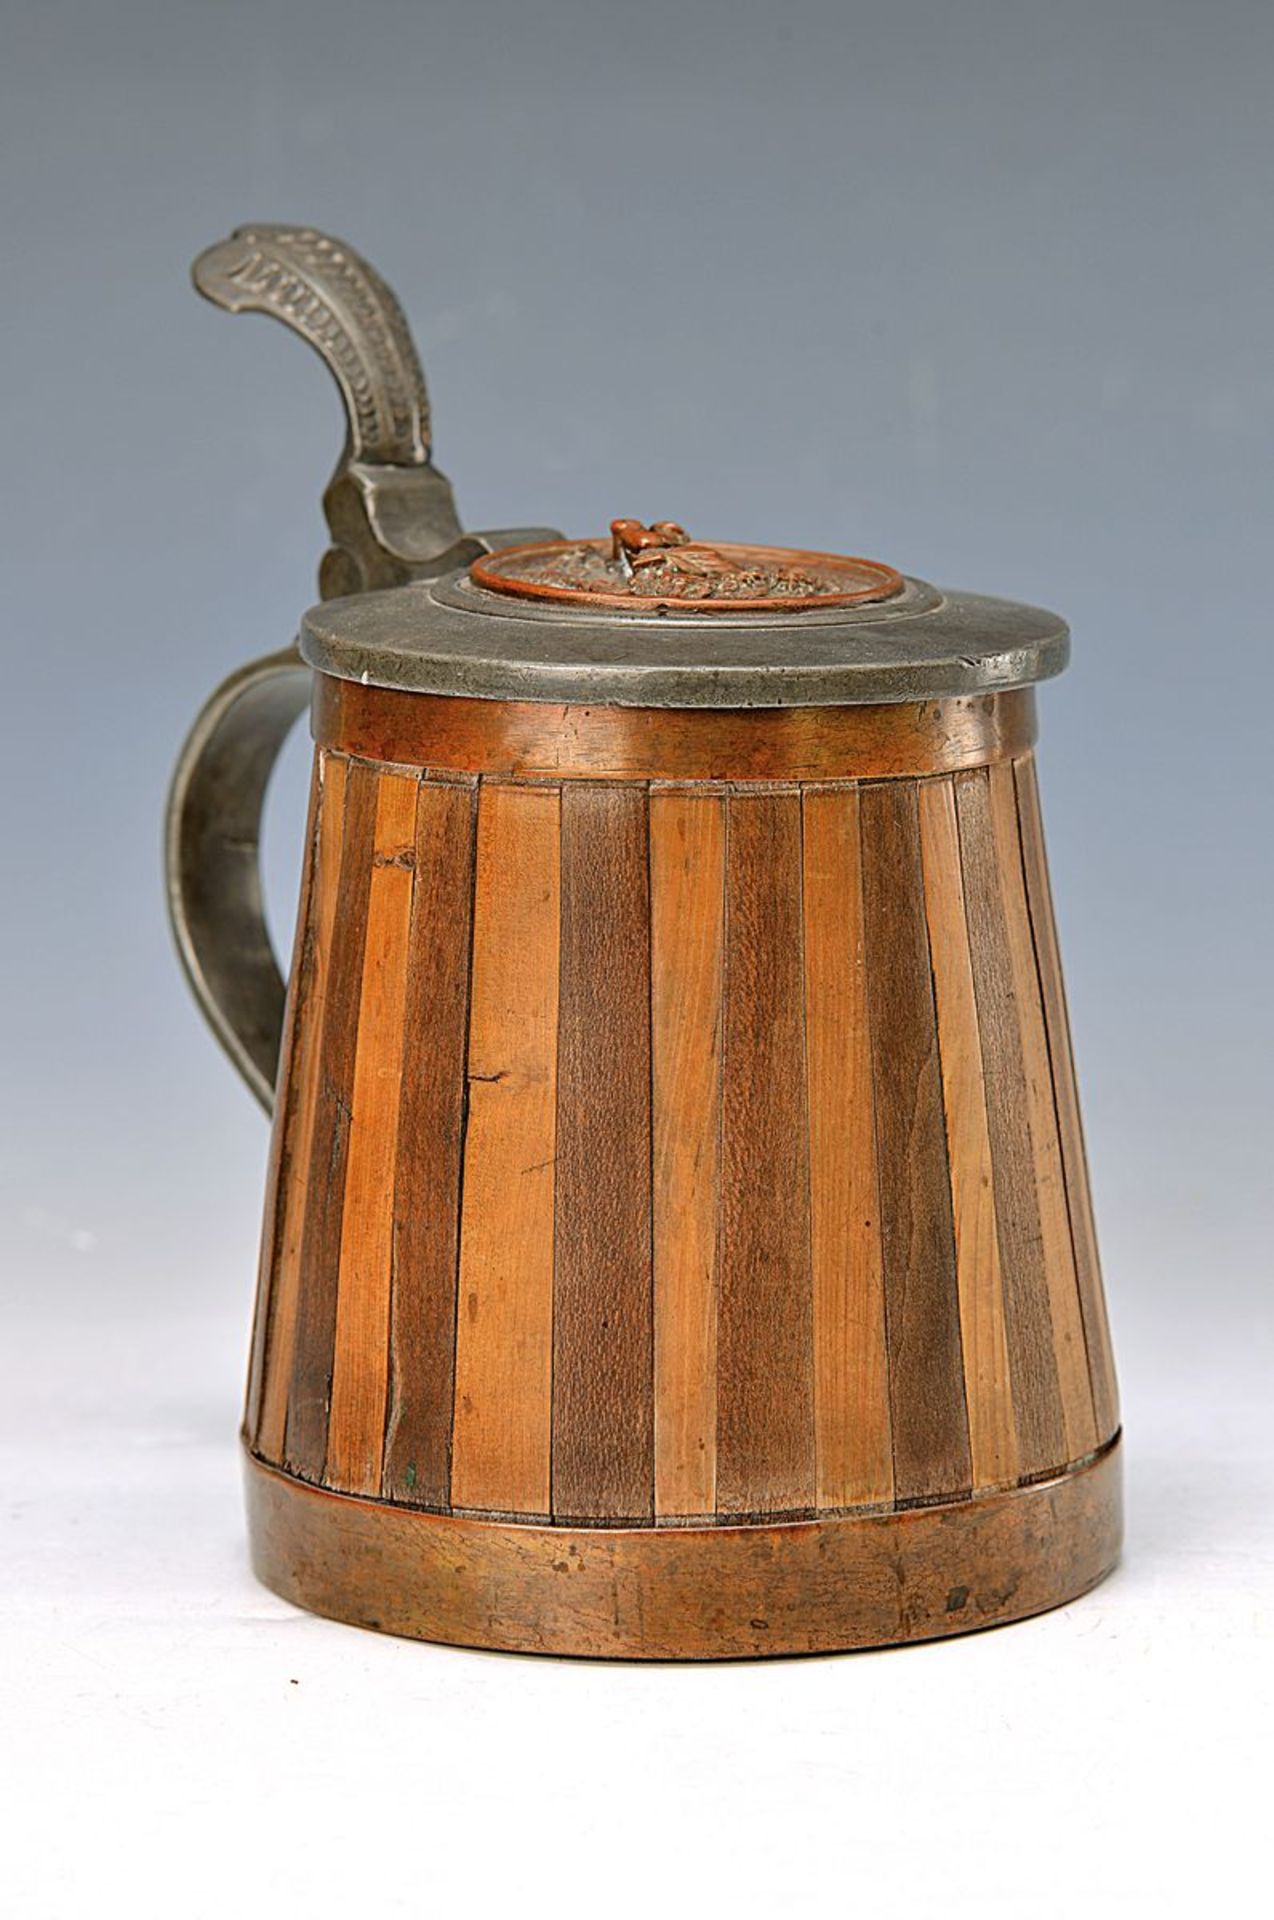 jar with tin cover with copper-plated inlet, Palatinate, around 1870, walnut and fruit